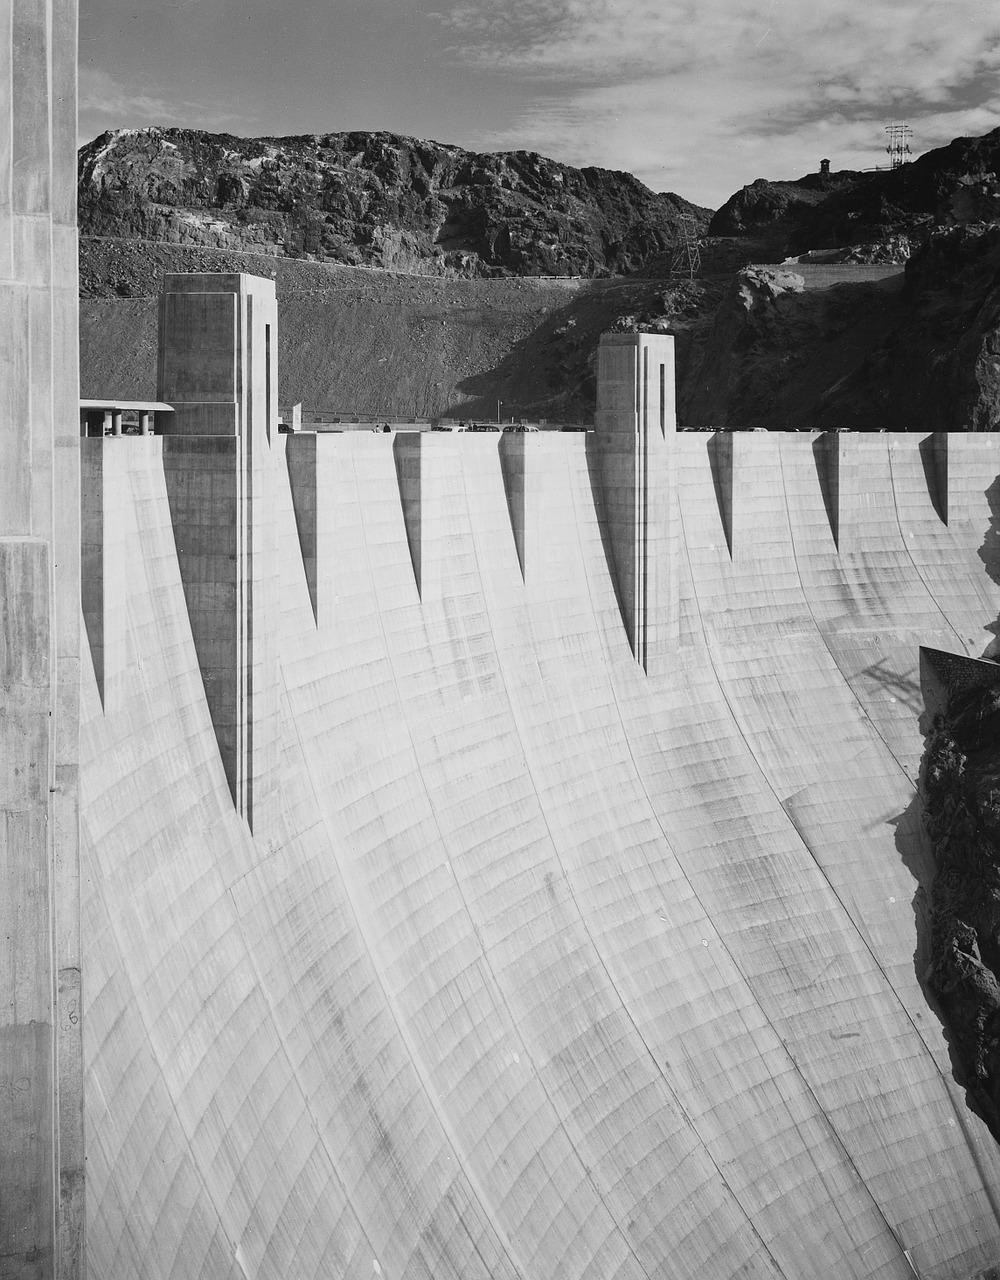 hoover dam black and white 1930s free photo